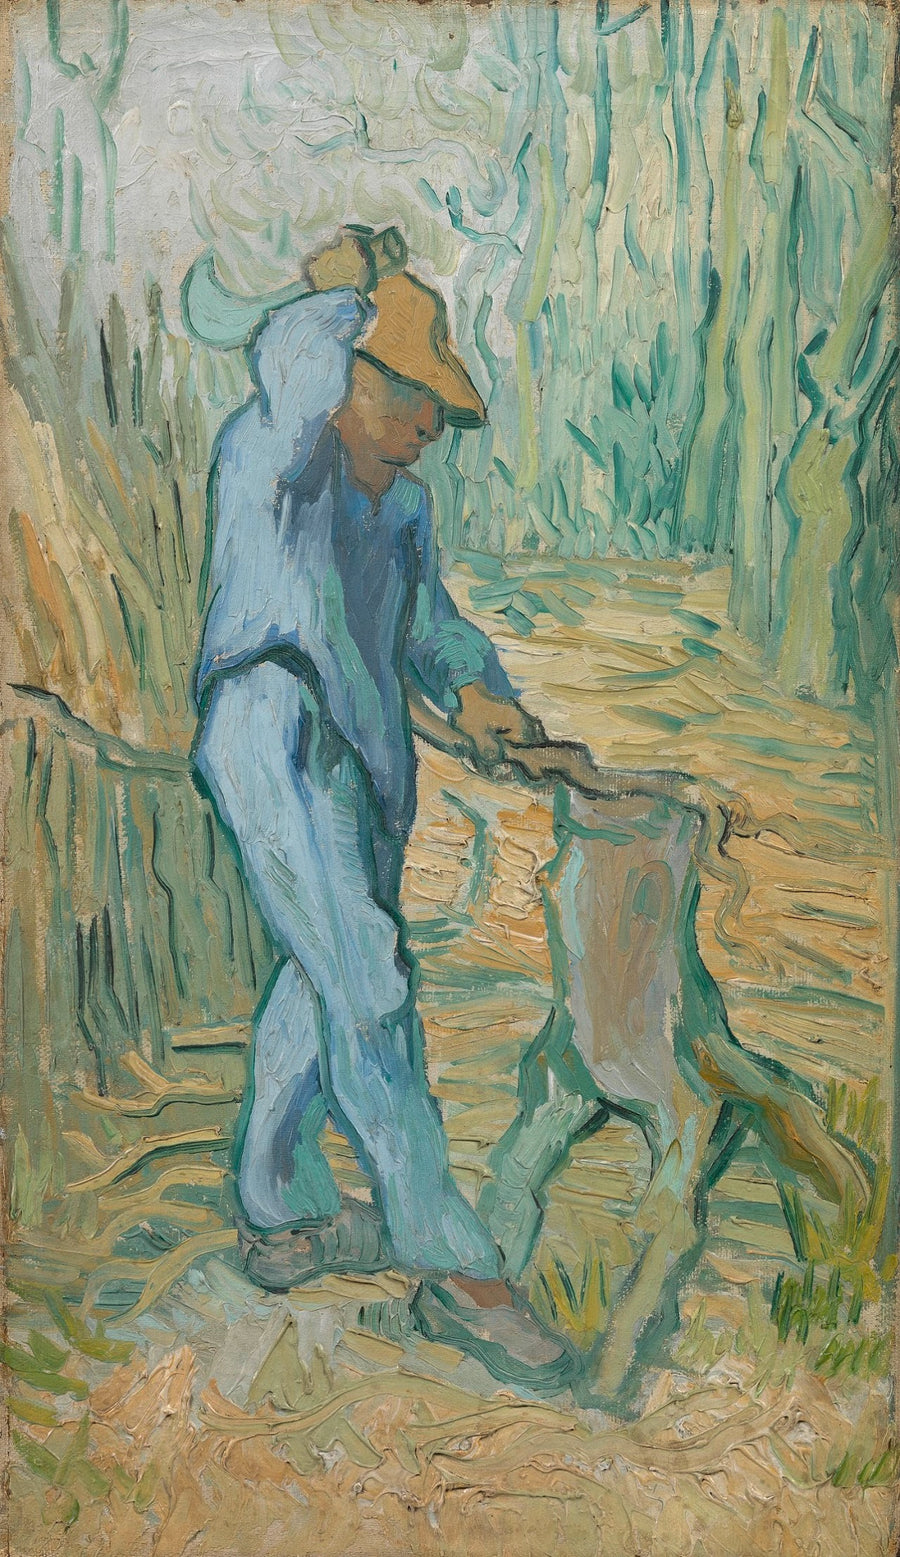 The Woodcutter after Jean-Francois Millet, 1890 by Van Gogh Reproduction for Sale - Blue Surf Art